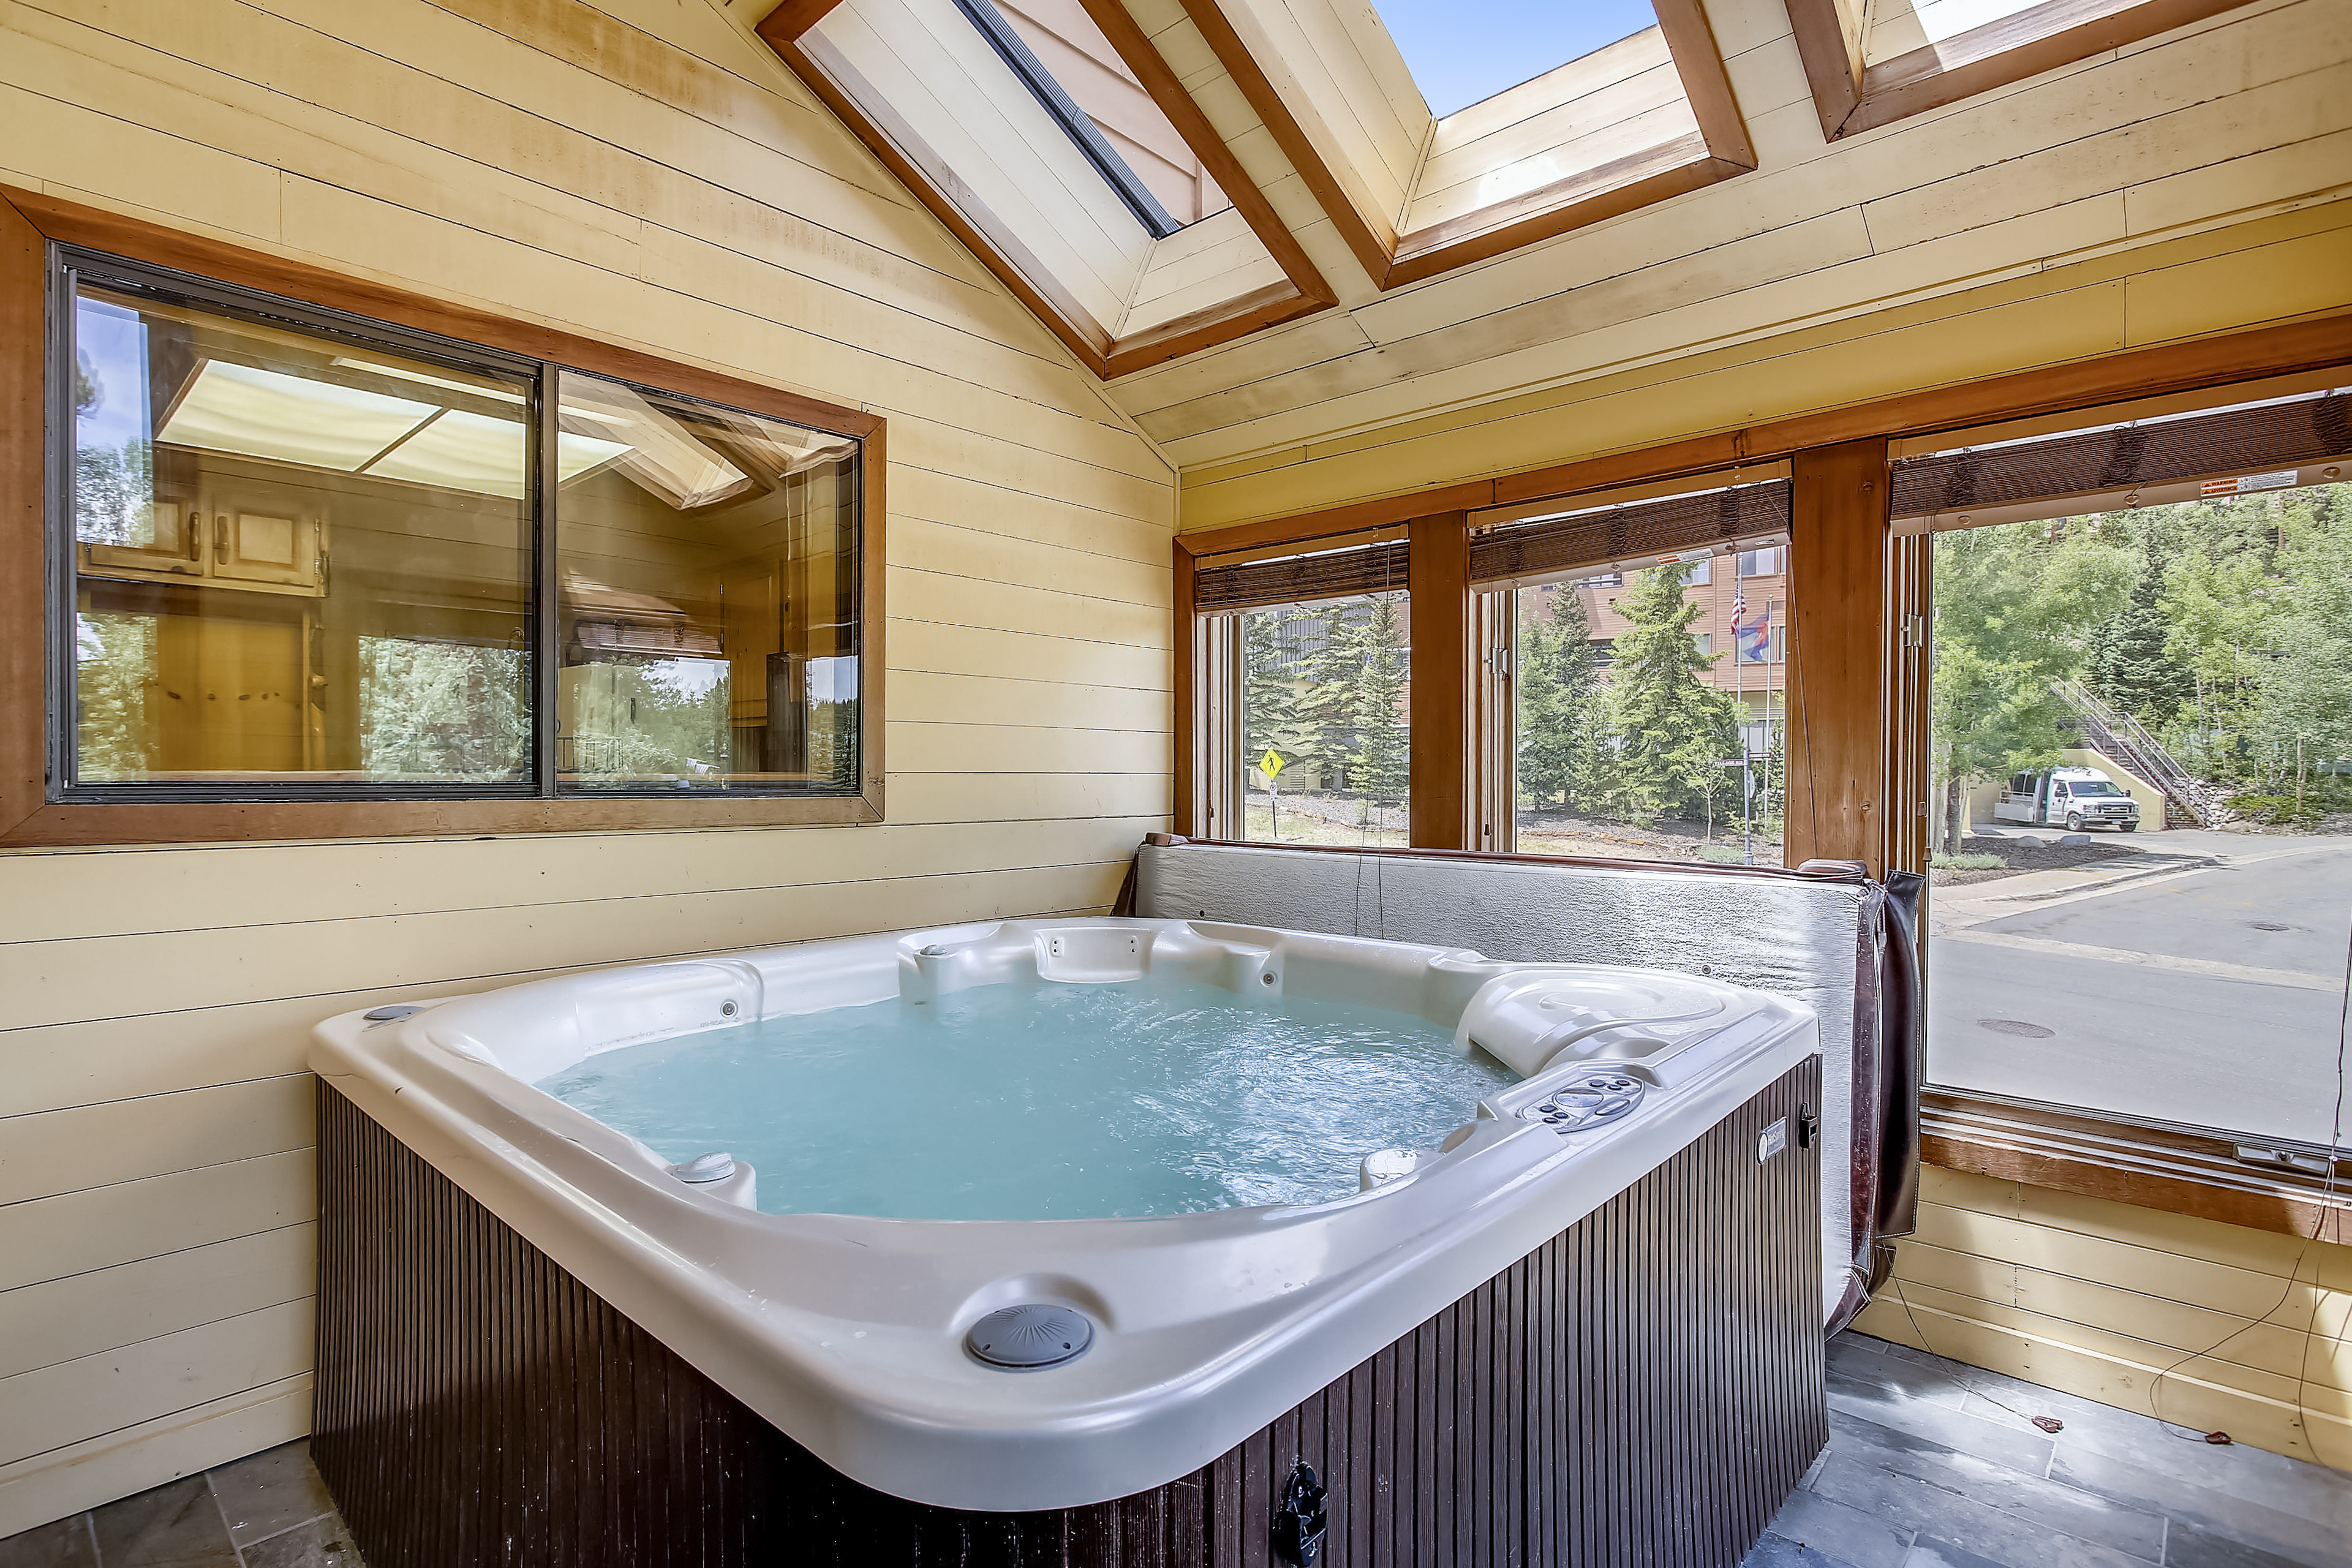 Soak in the communal hot tubs after a long day - Cedars 53 Breckenridge Vacation Rental